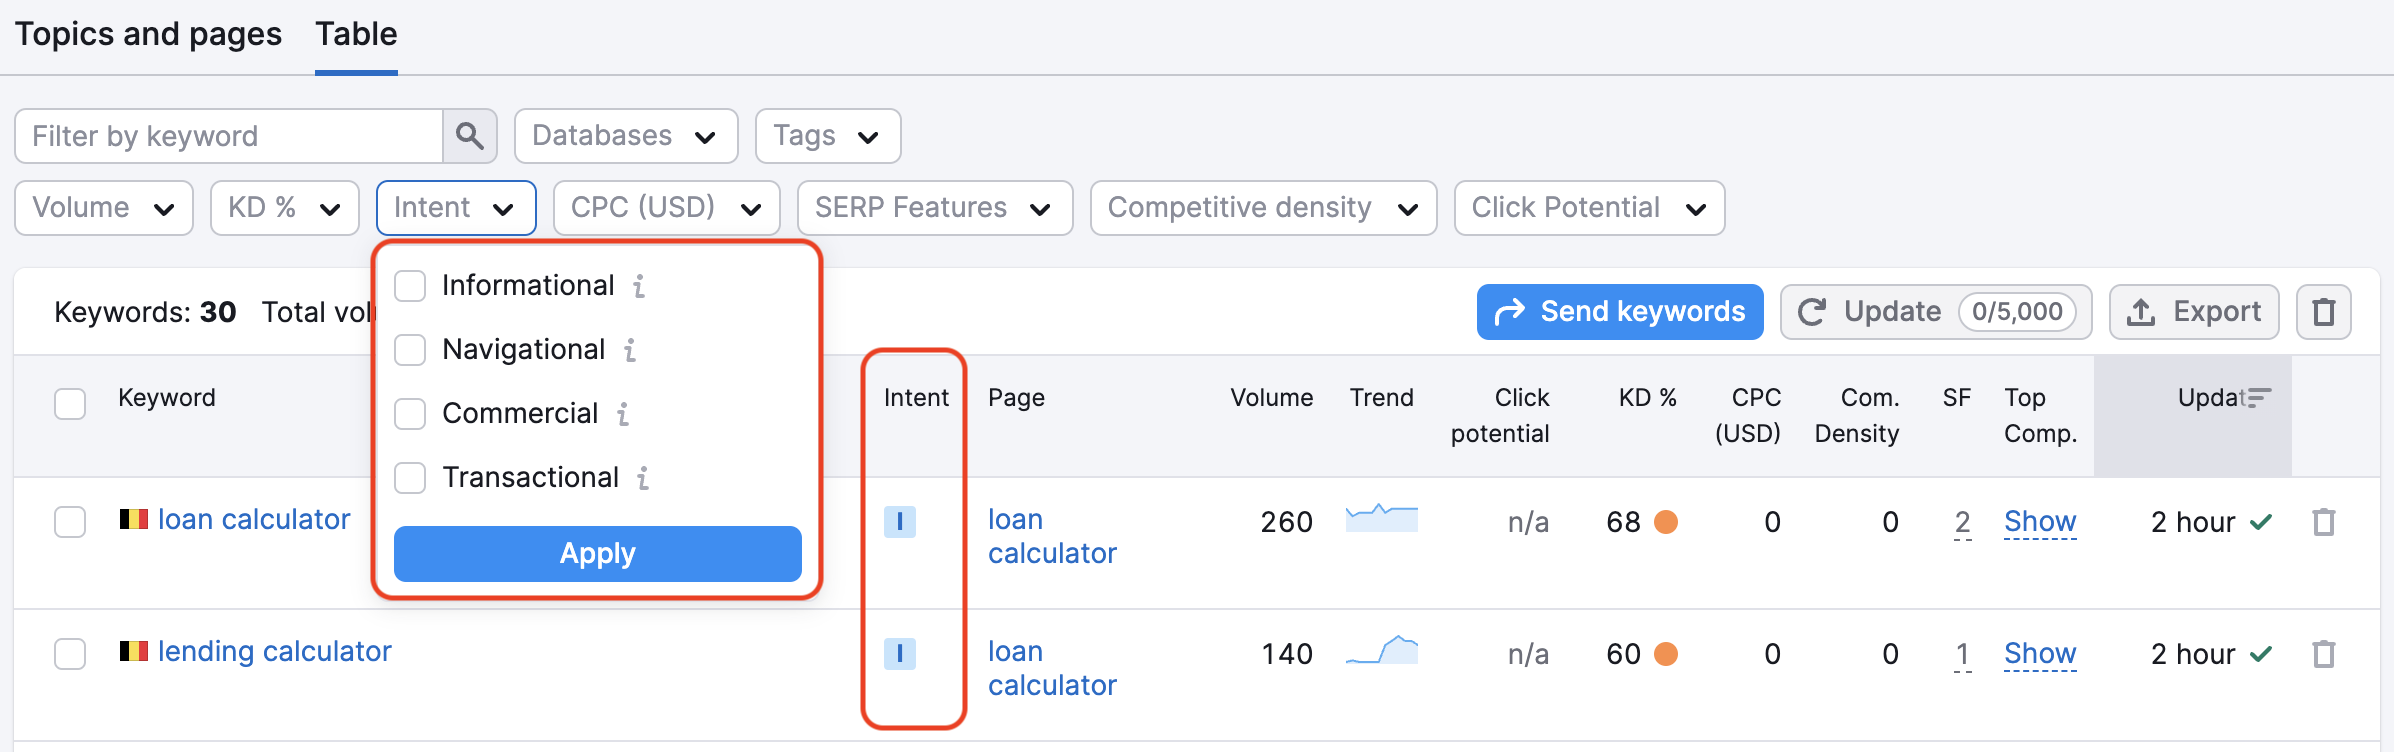 An example of the Table tab in Keyword Strategy Builder with an Intention filter highlighted with red rectangles in the filters menu and in the table with keywords.